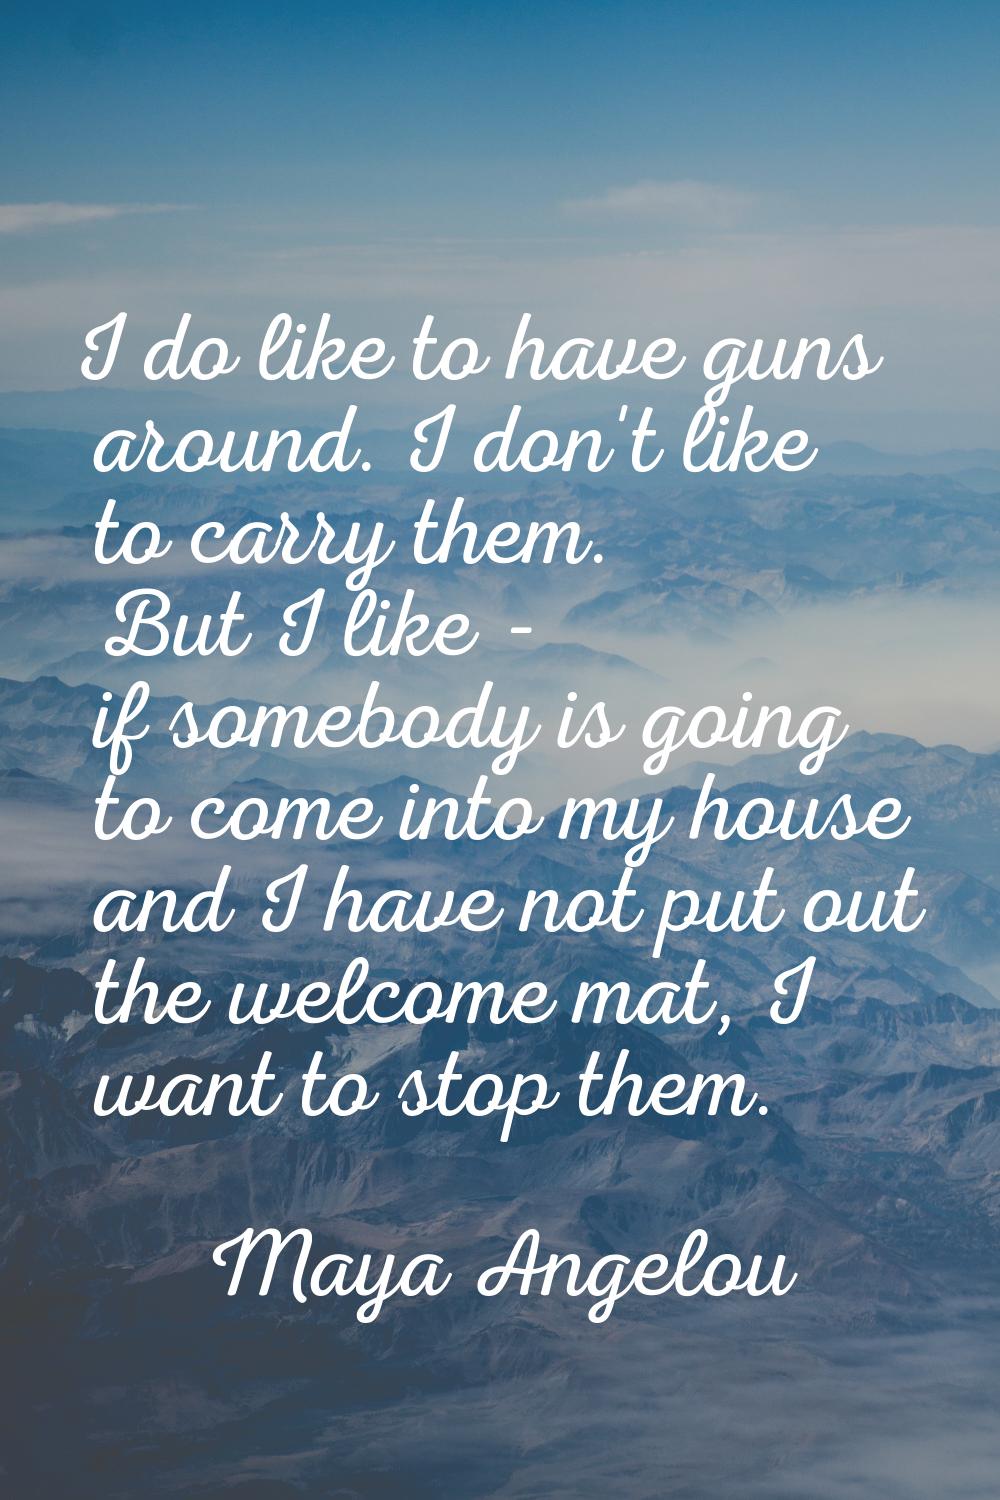 I do like to have guns around. I don't like to carry them. But I like - if somebody is going to com